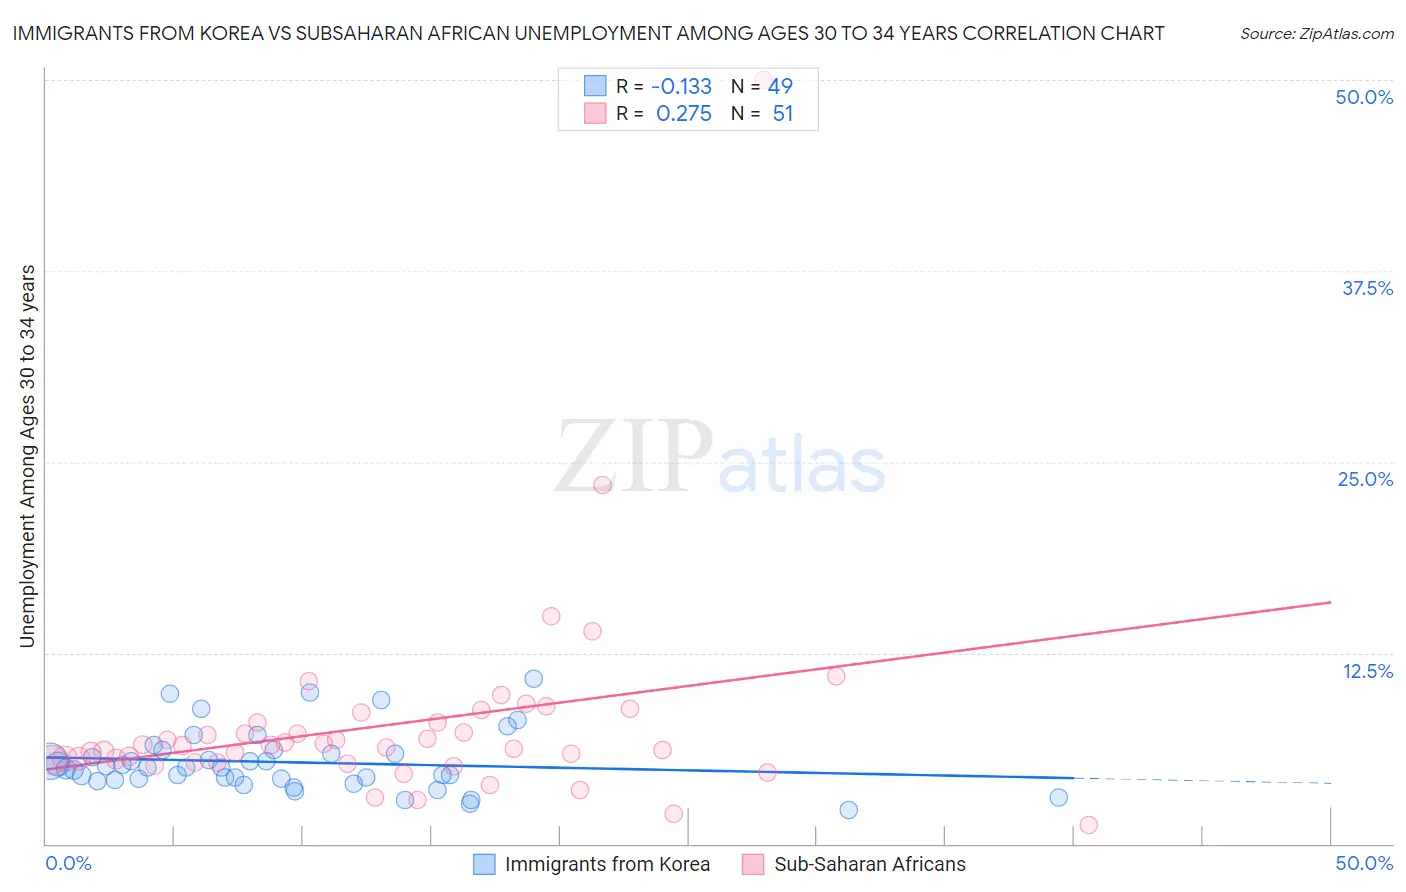 Immigrants from Korea vs Subsaharan African Unemployment Among Ages 30 to 34 years